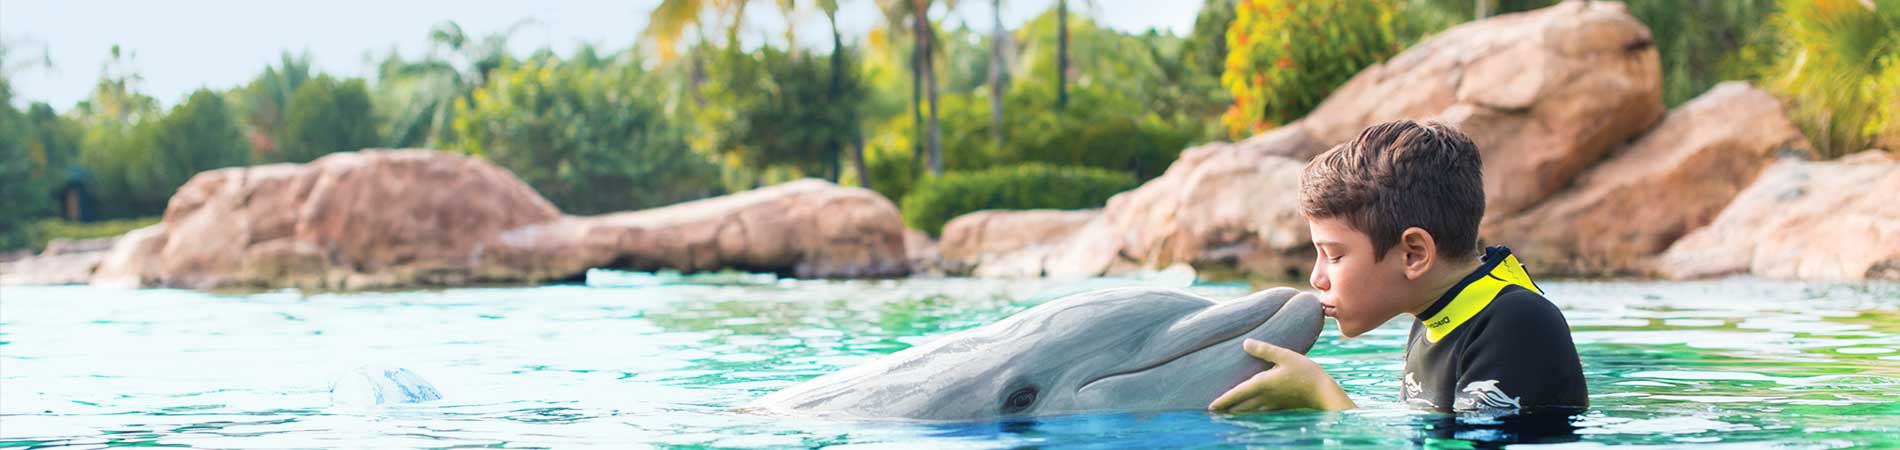 Get up close with amazing dolphins at Discovery Cove.